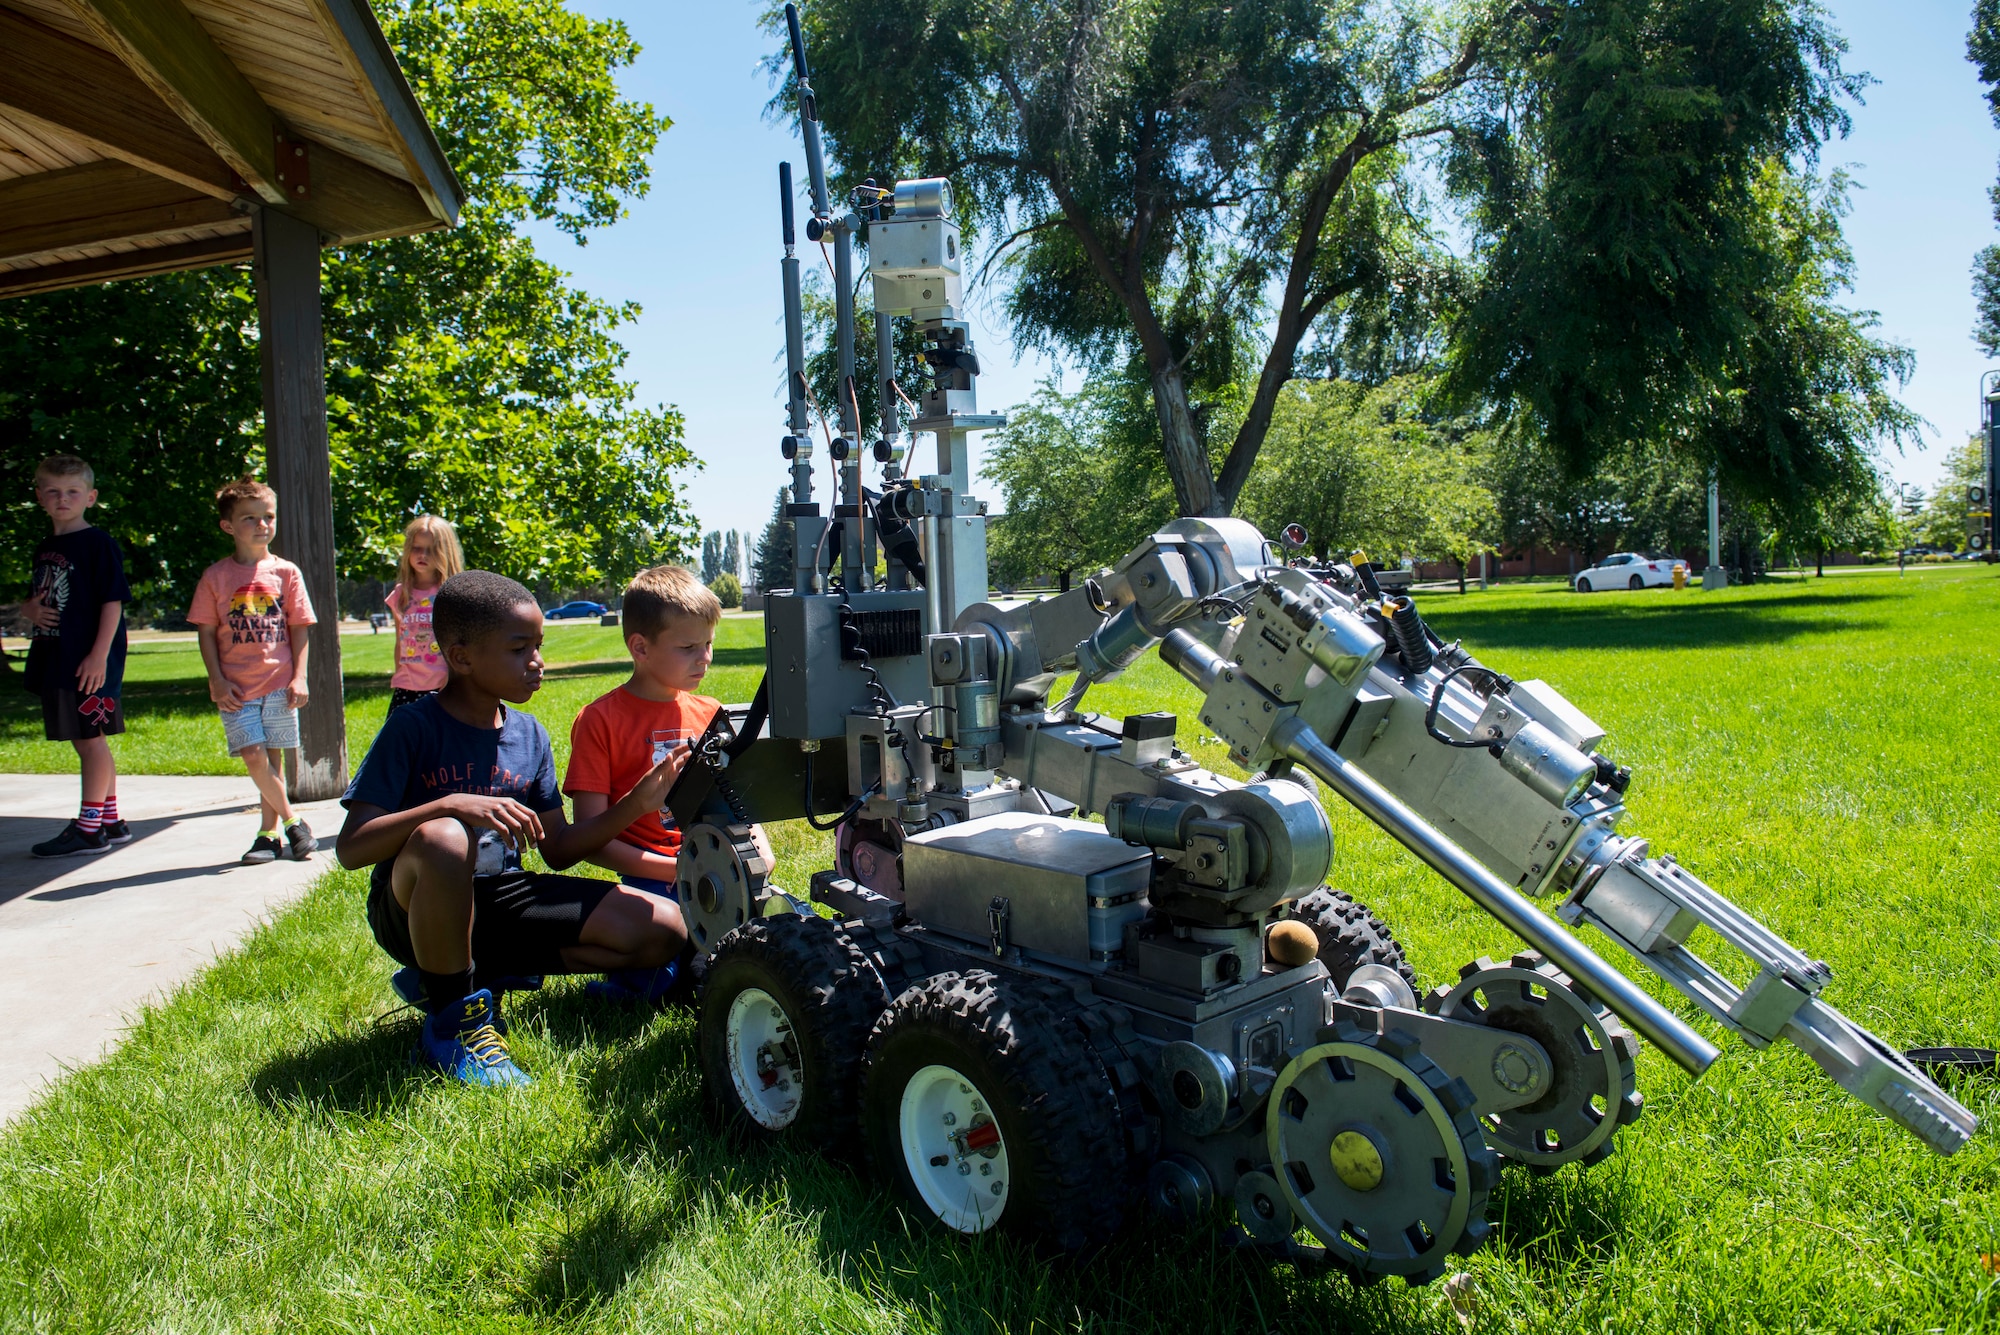 Children with the Fairchild Youth Center explore an explosive ordnance disposal robot from the 92nd Civil Engineer Squadron Explosive Ordnance Disposal flight, during the Summer Youth Fair at Fairchild Air Force Base, Washington, July 25, 2019. Members from Fairchild’s 92nd Civil Engineer Squadron Fire Department, Explosive Ordnance Disposal team, 92nd Security Forces Squadron and 92nd Medical Group provided activities and educational exhibits. (U.S. Air Force photo by Airman 1st Class Lawrence Sena)